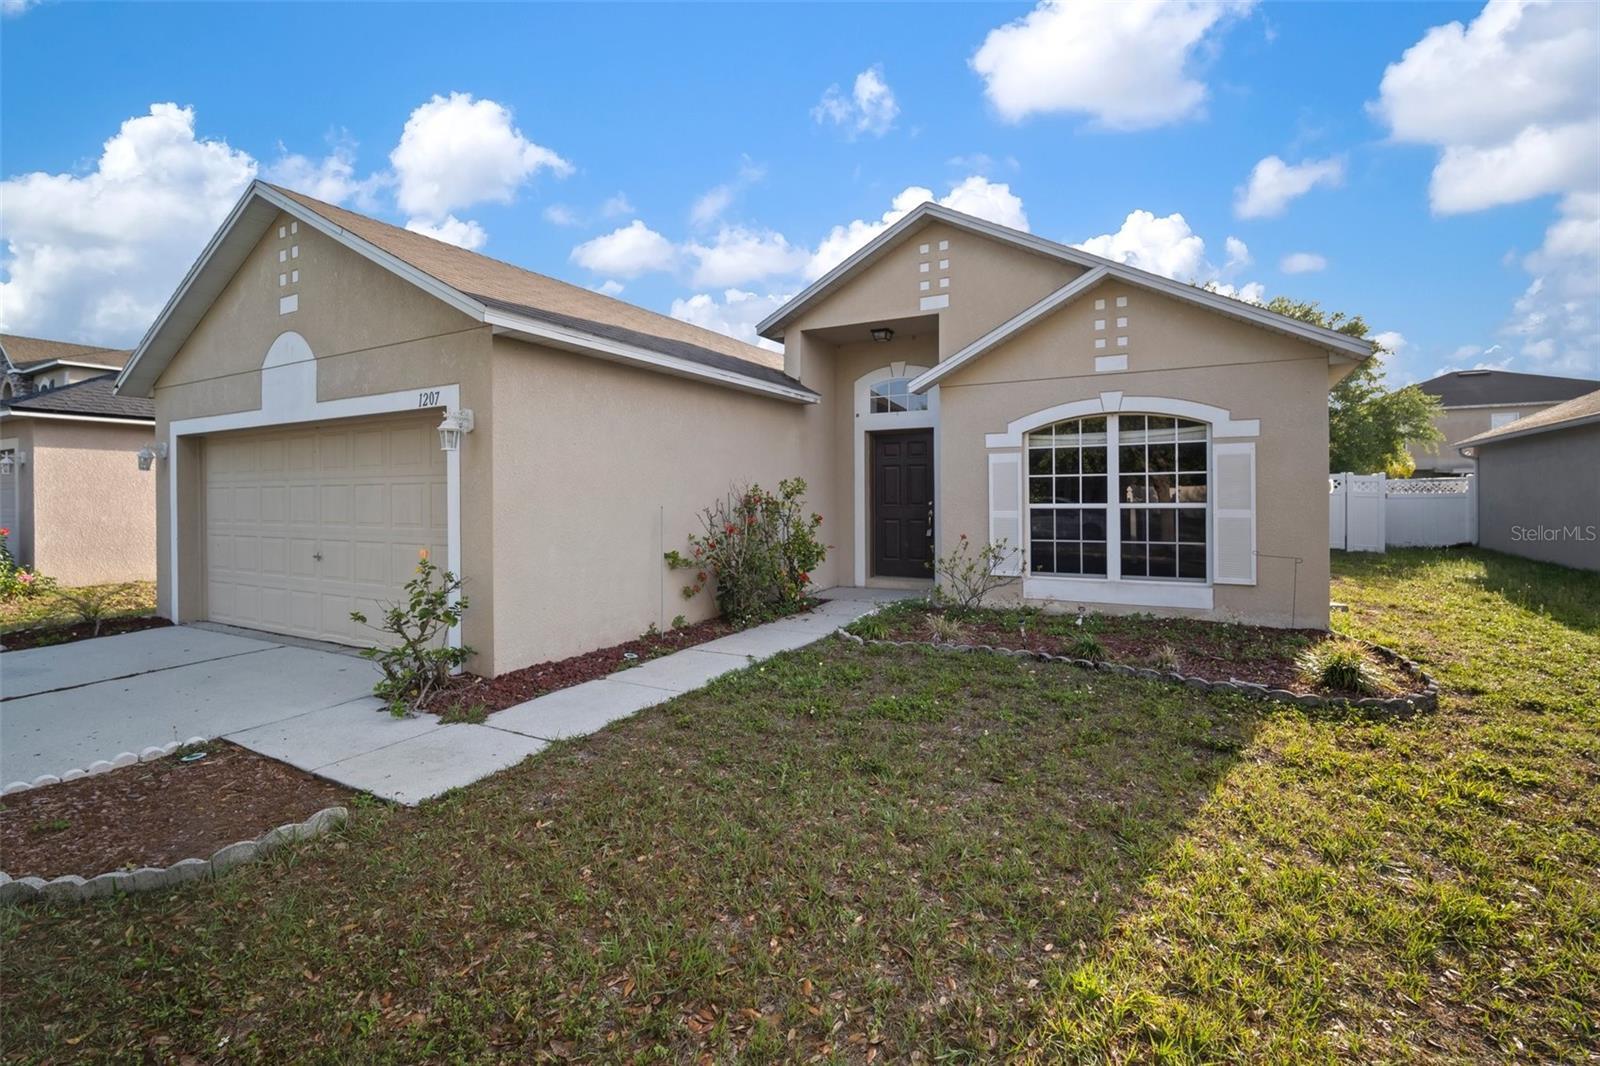 Photo one of 1207 Alhambra Crest Dr Ruskin FL 33570 | MLS T3510810